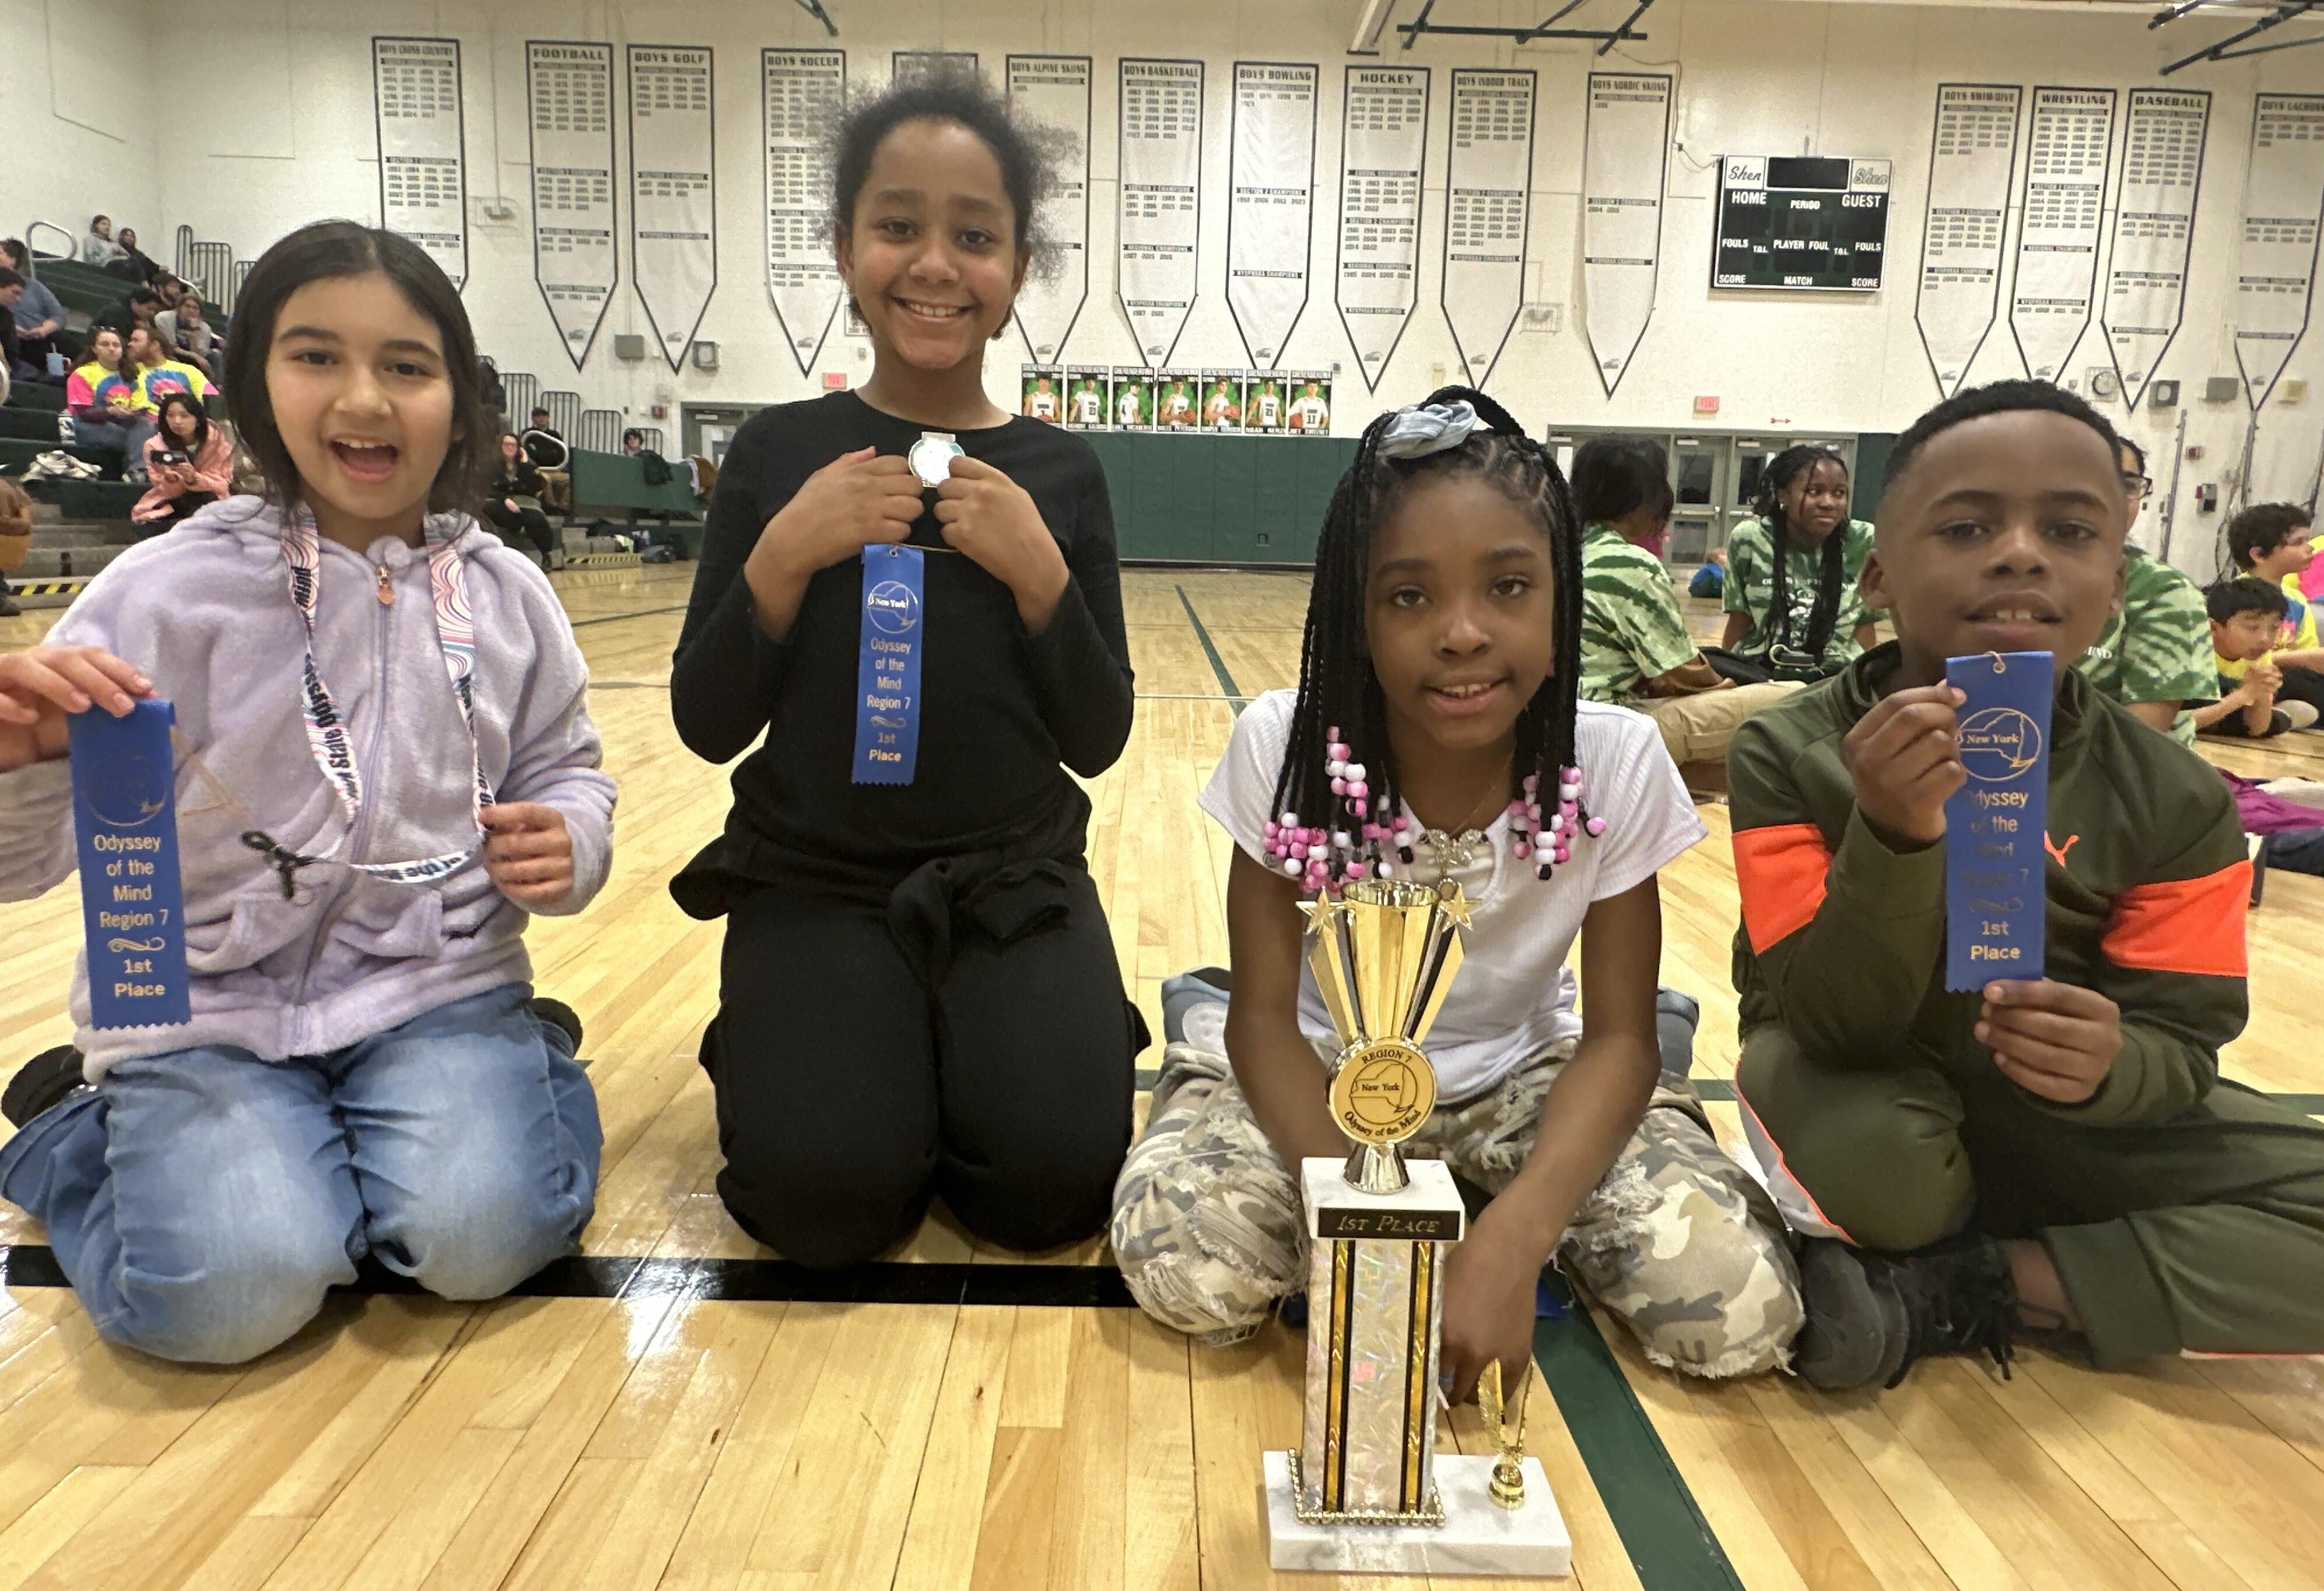 Members of the Odyssey of the Mind team posing with their award